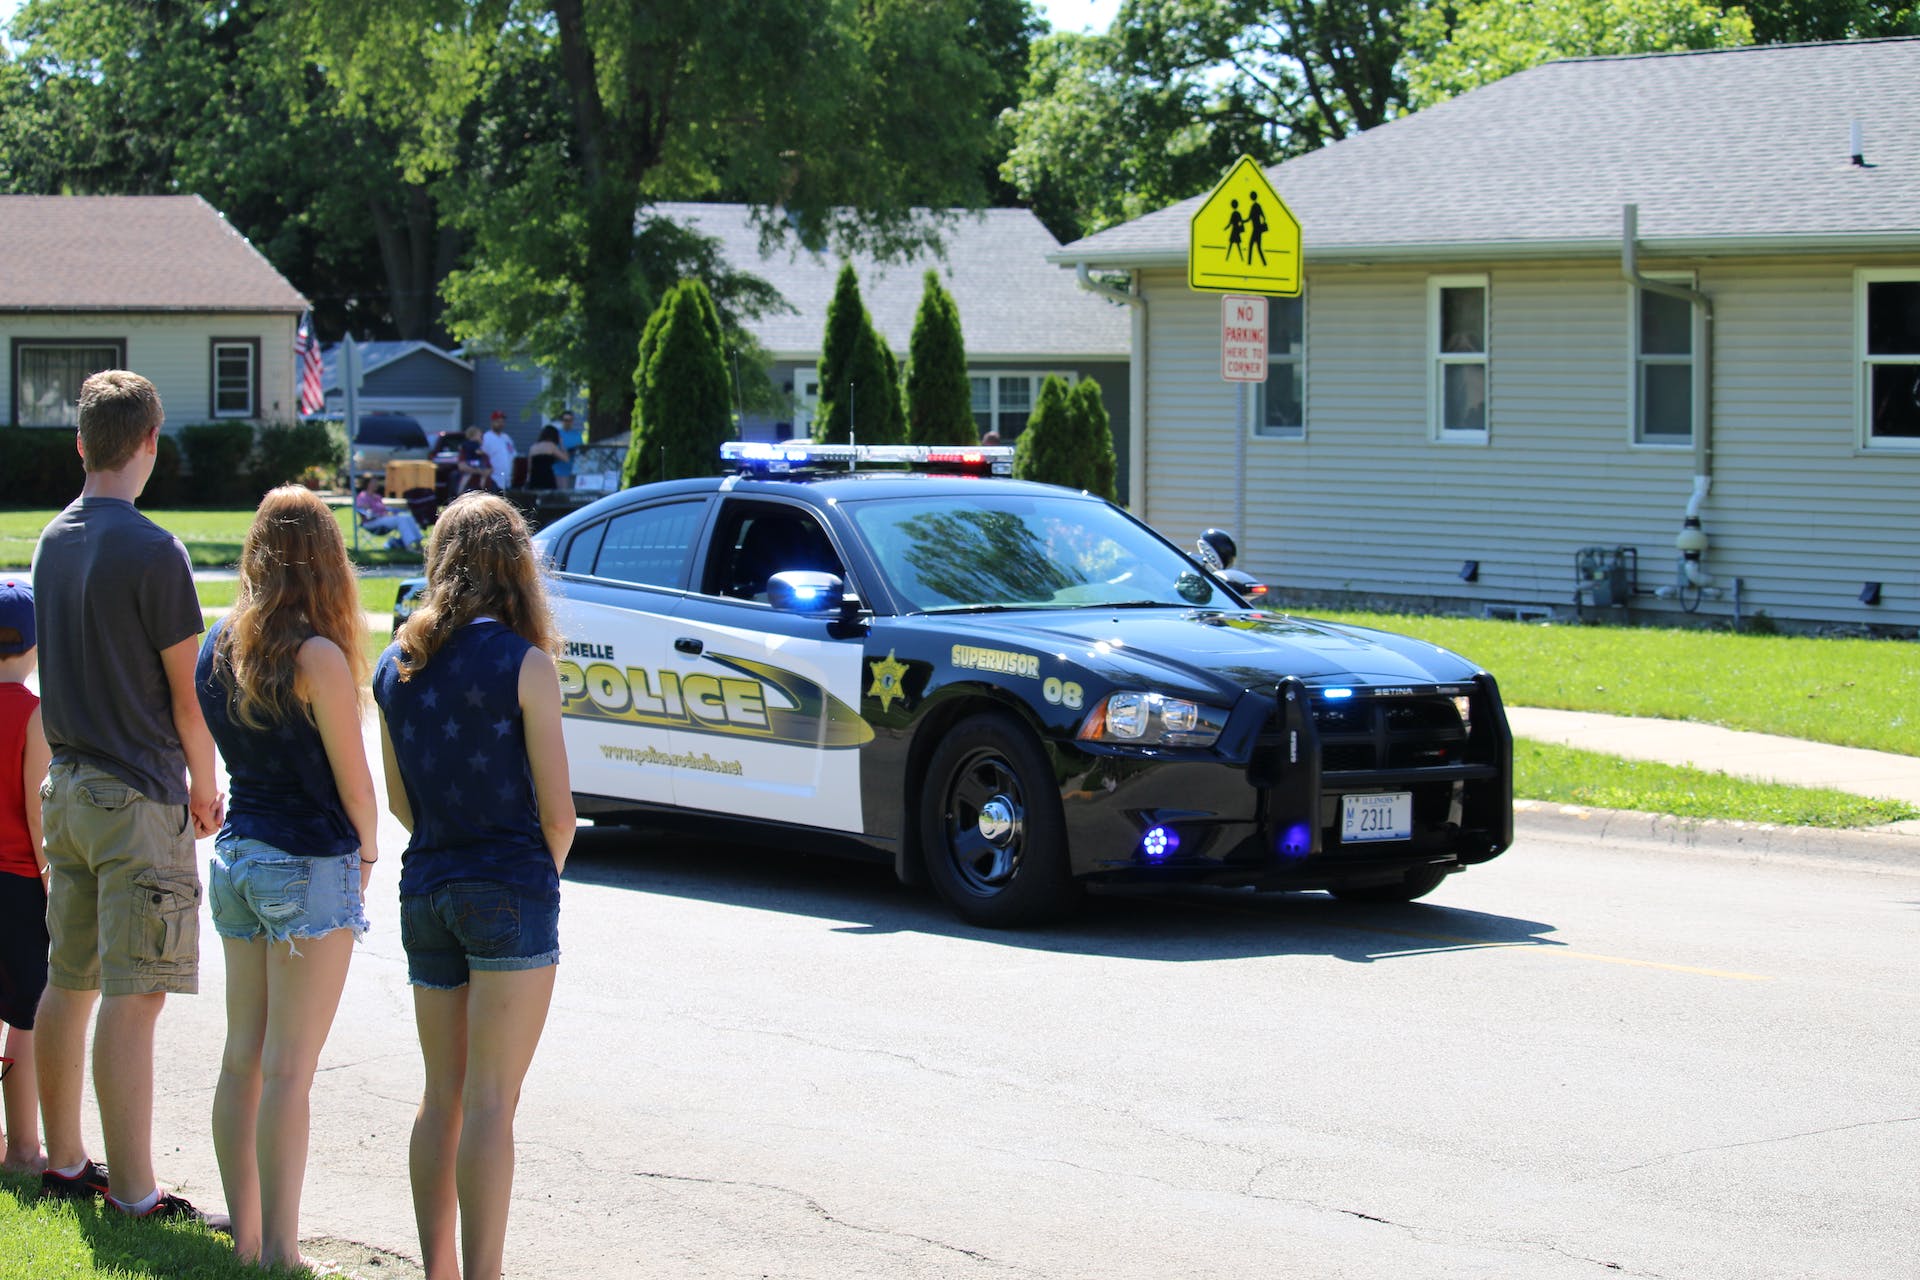 People looking at a police car passing through a neighborhood | Source: Pexels